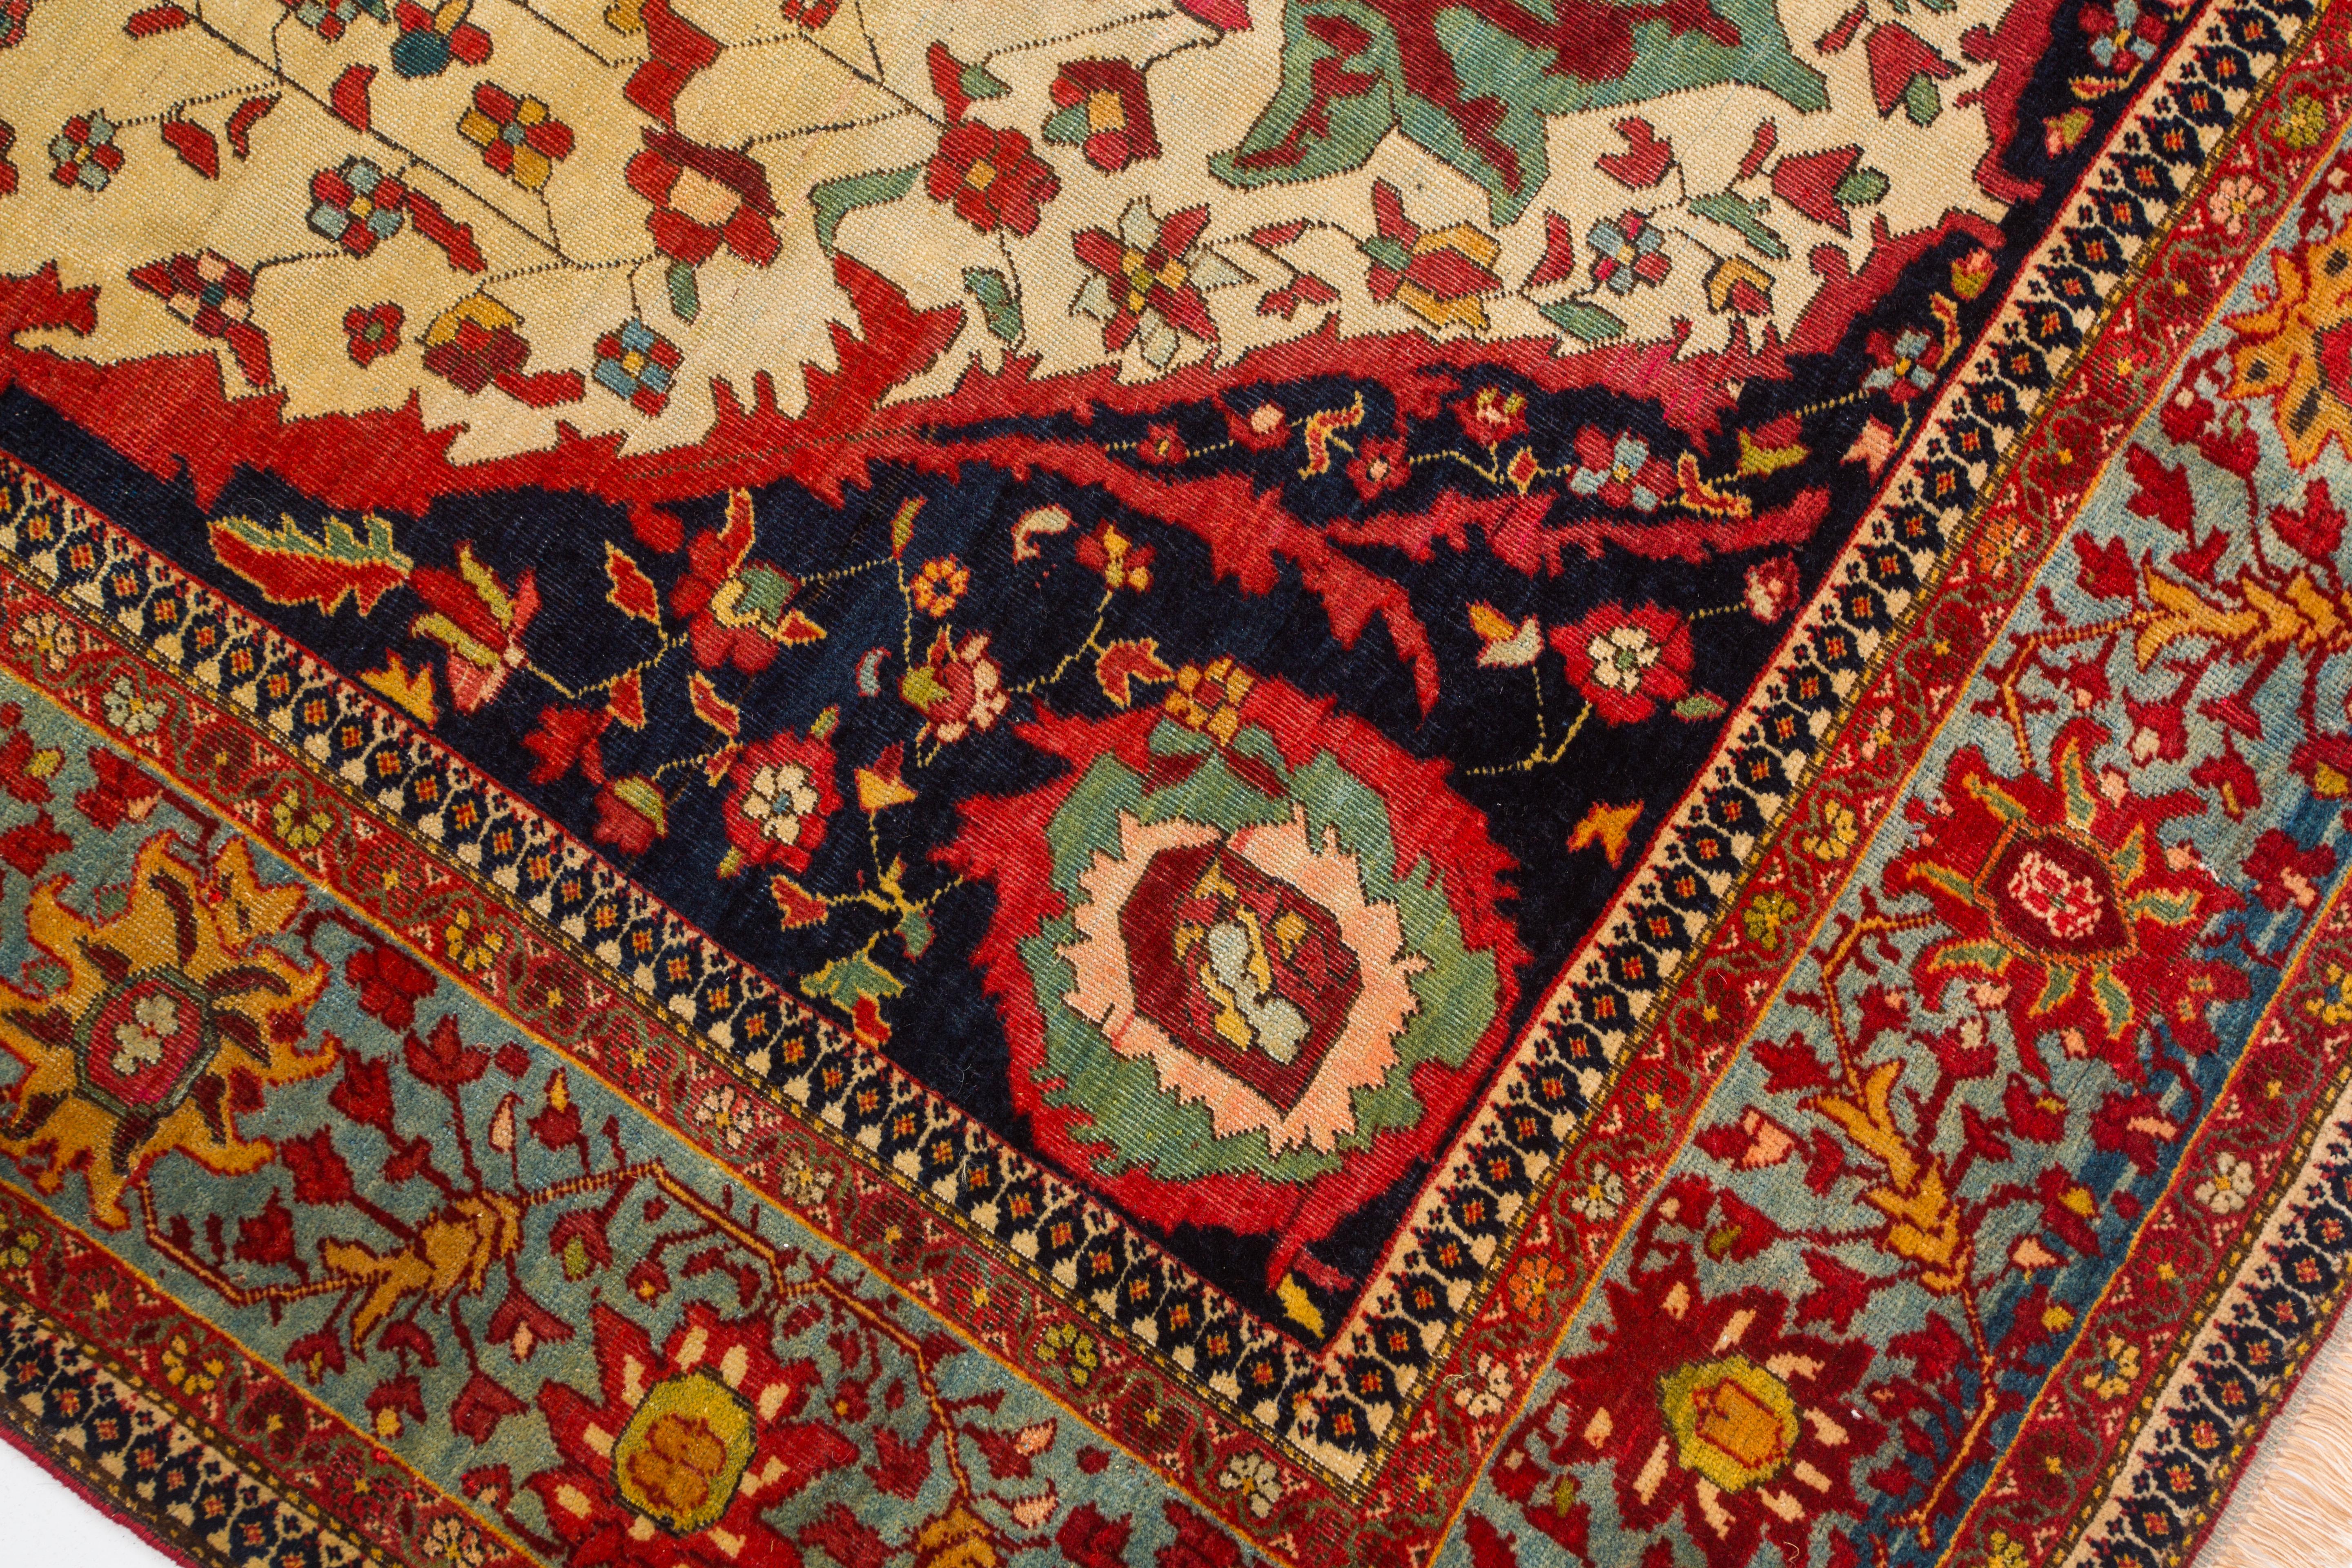 Acquired from a Swedish collector

Ferahan Sarouk carpets produced around the wider Arak (city) area from about 1850-1900 earned a deserved reputation as amongst the most desirable and imaginative finely woven carpets in Persia. As these things